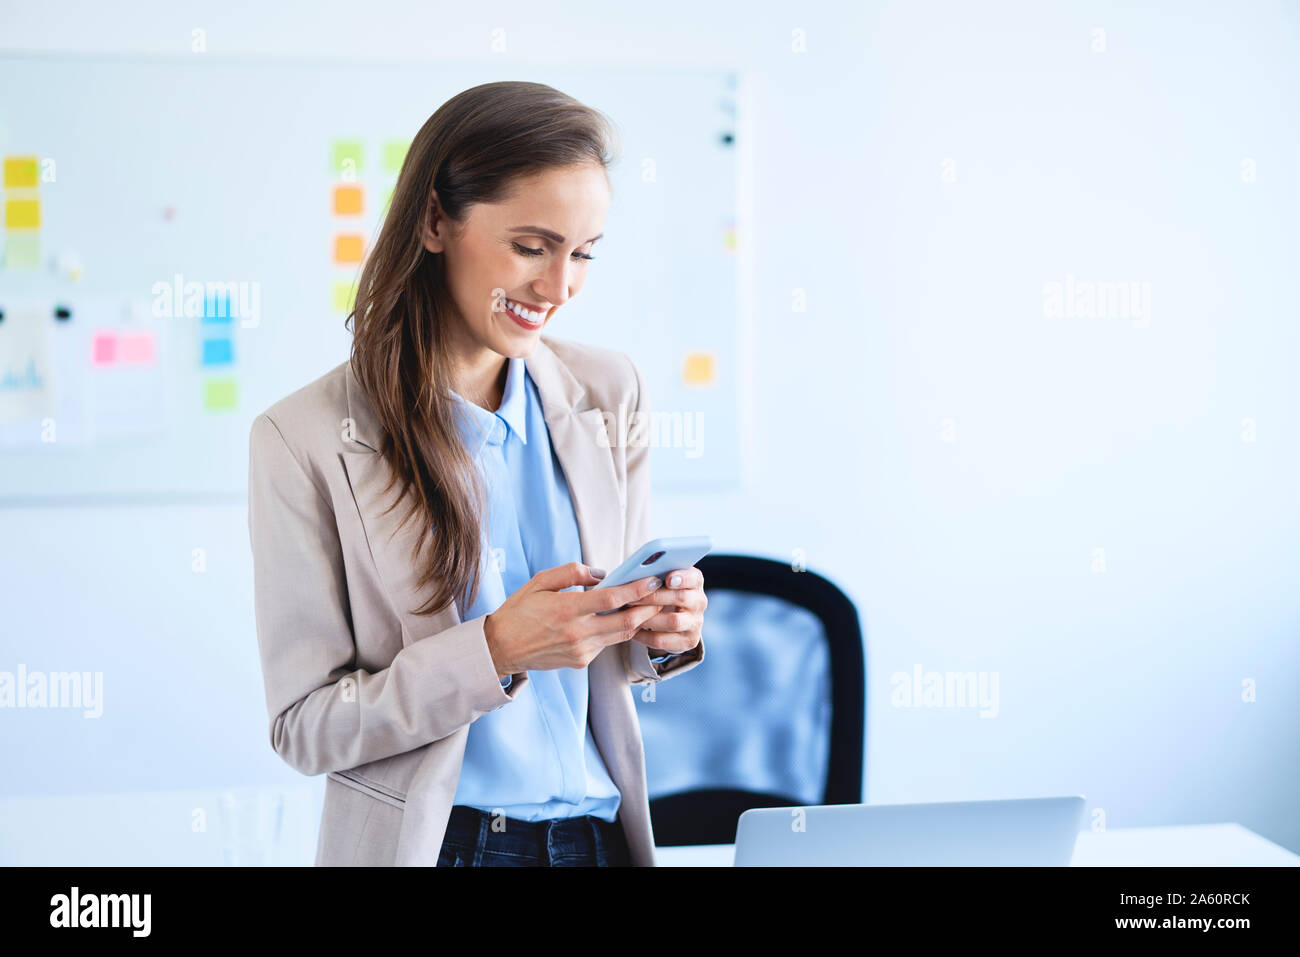 Smiling businesswoman standing in office using smartphone Banque D'Images